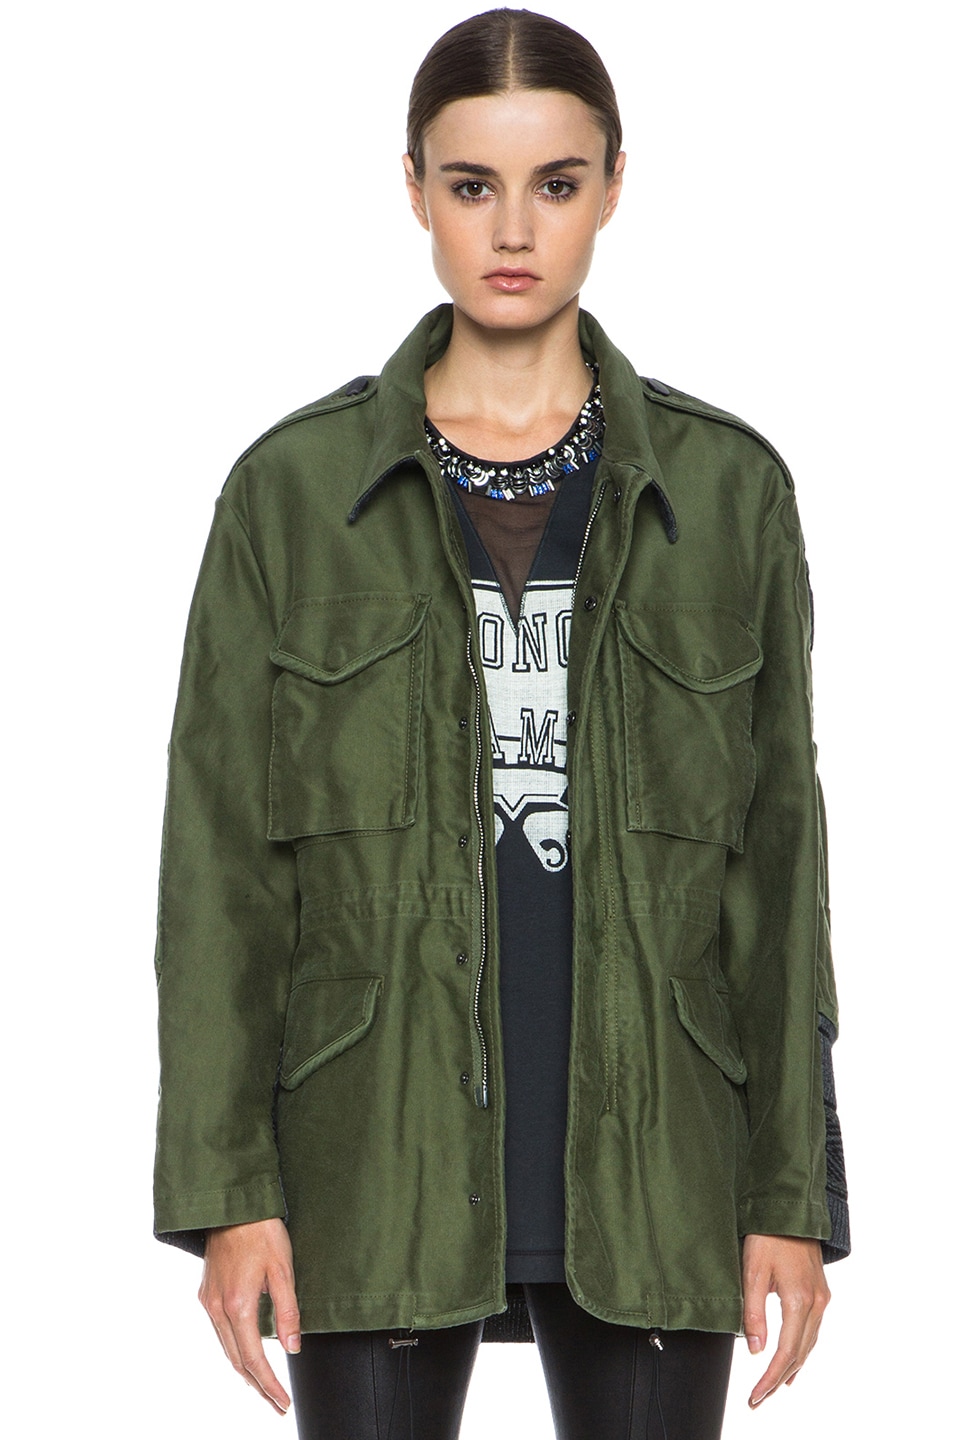 3.1 phillip lim Canvas Trompe L'oeil Anorak with Knit Back in Army ...